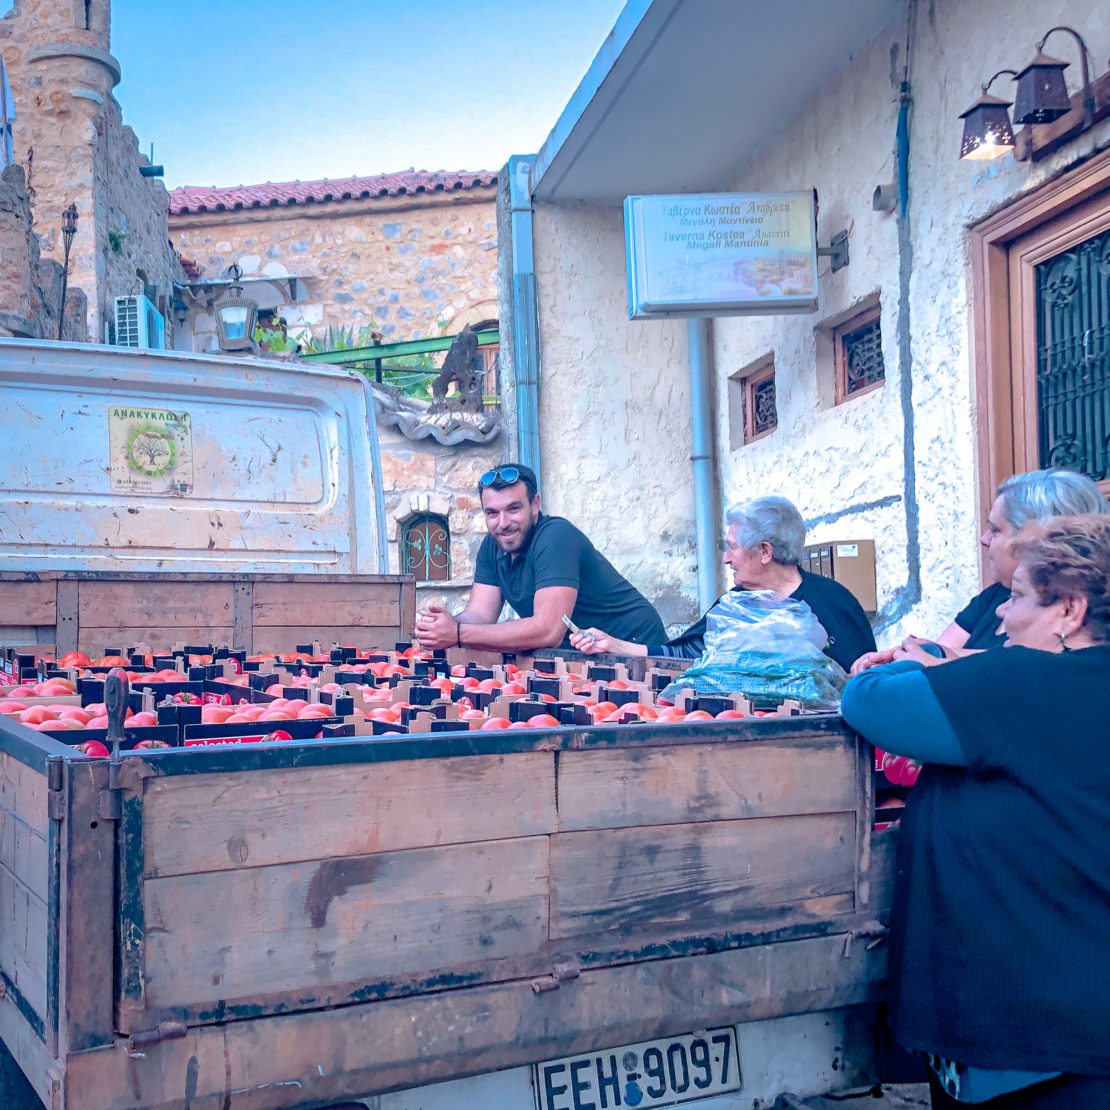 Community selling fresh tomatoes in Greece